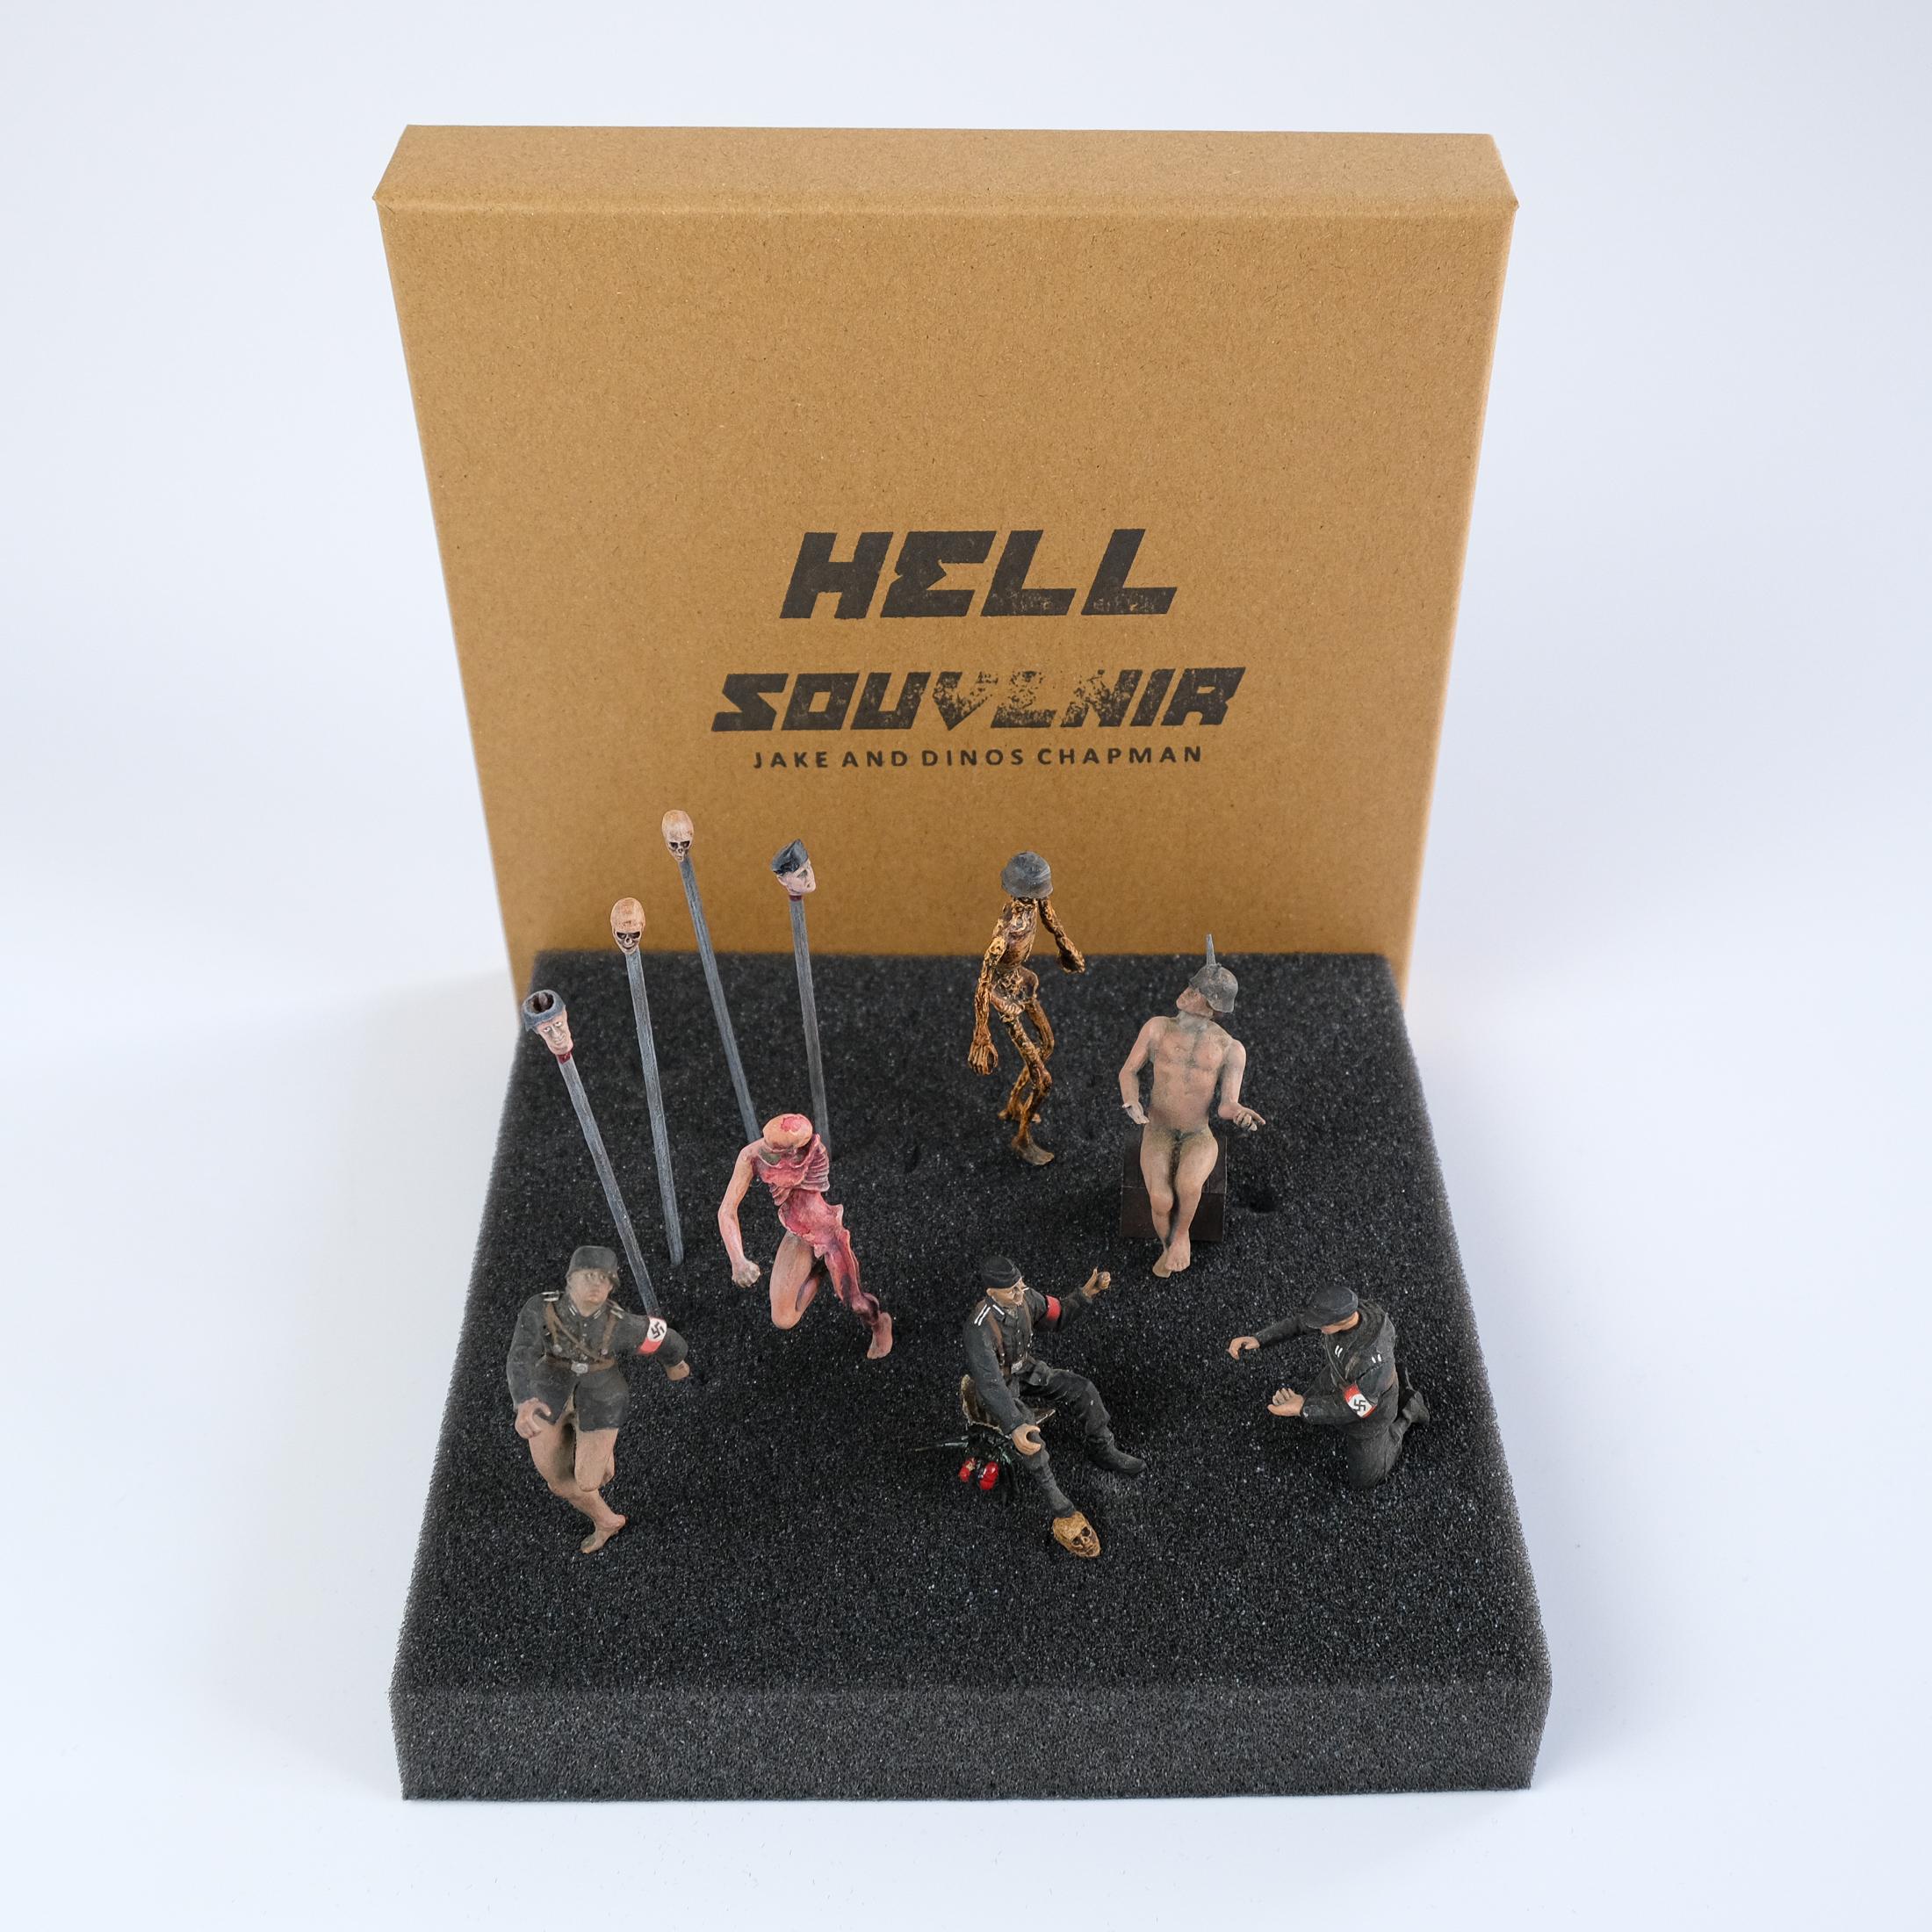 British 'Hell Souvenir' figures By Jake and Dinos Chapman, 2022 For Sale